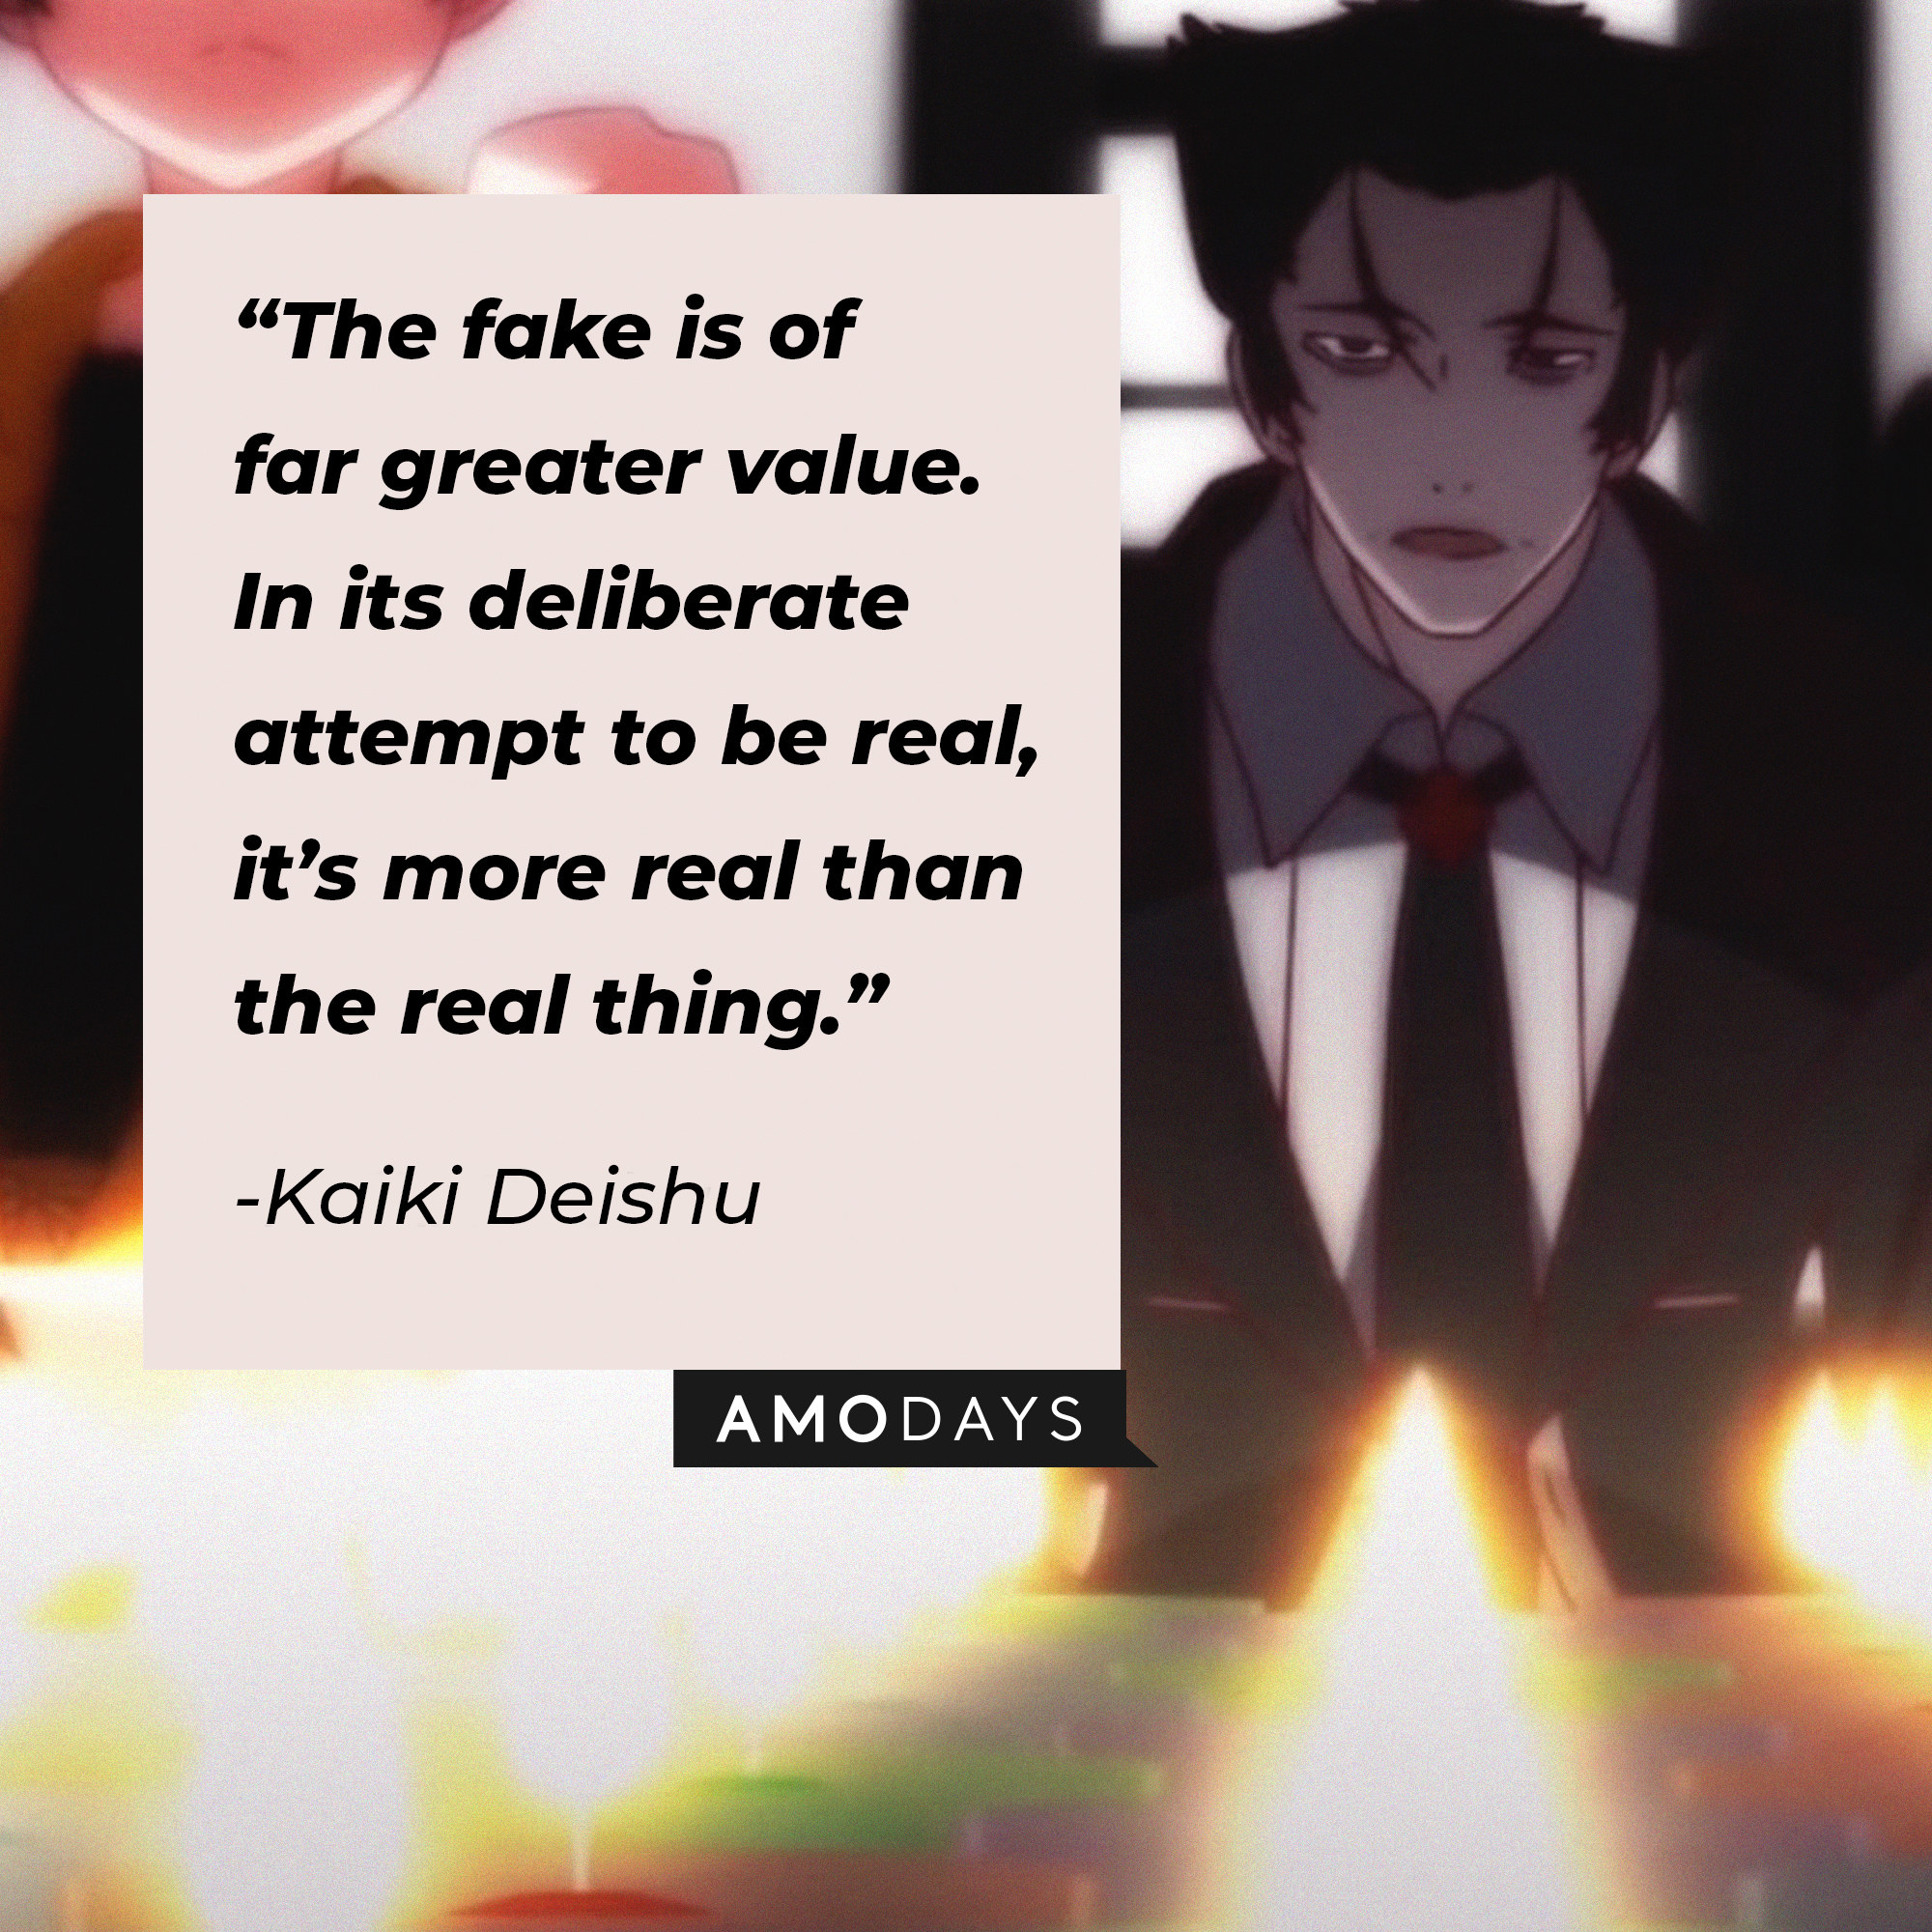 Kaiki Deshu’s quote: "The fake is of far greater value. In its deliberate attempt to be real, it's more real than the real thing." | Image: AmoDays